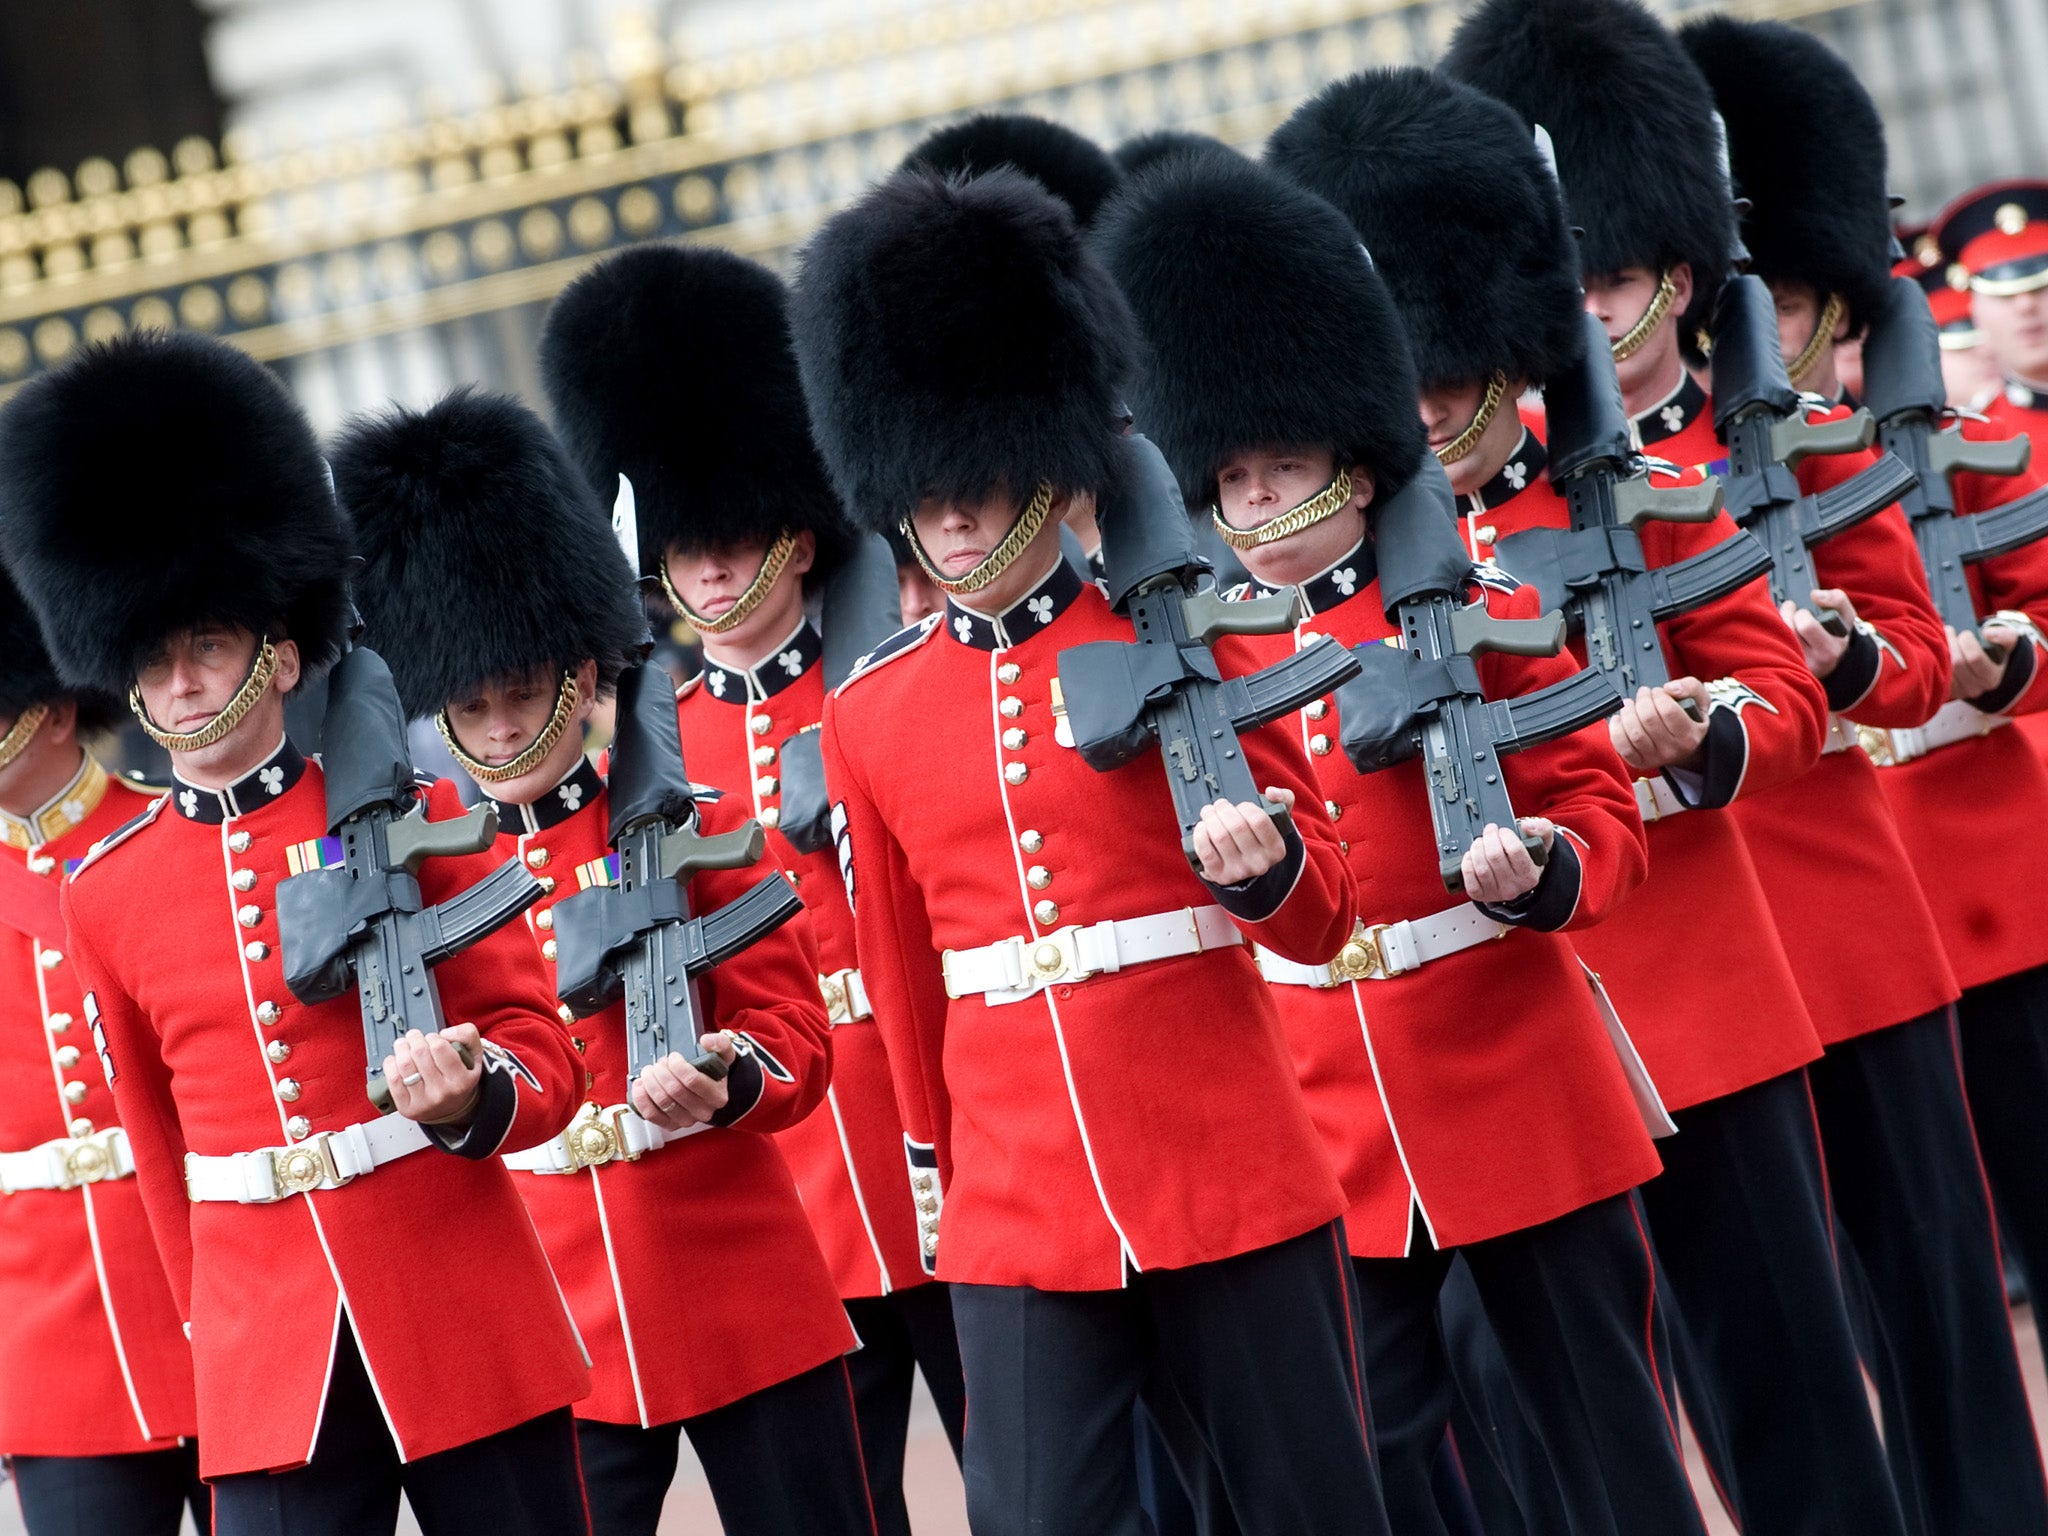 Queen's guard outside Buckingham Palace carrying rifles the same as which the guardsman pointed at the man during the incident